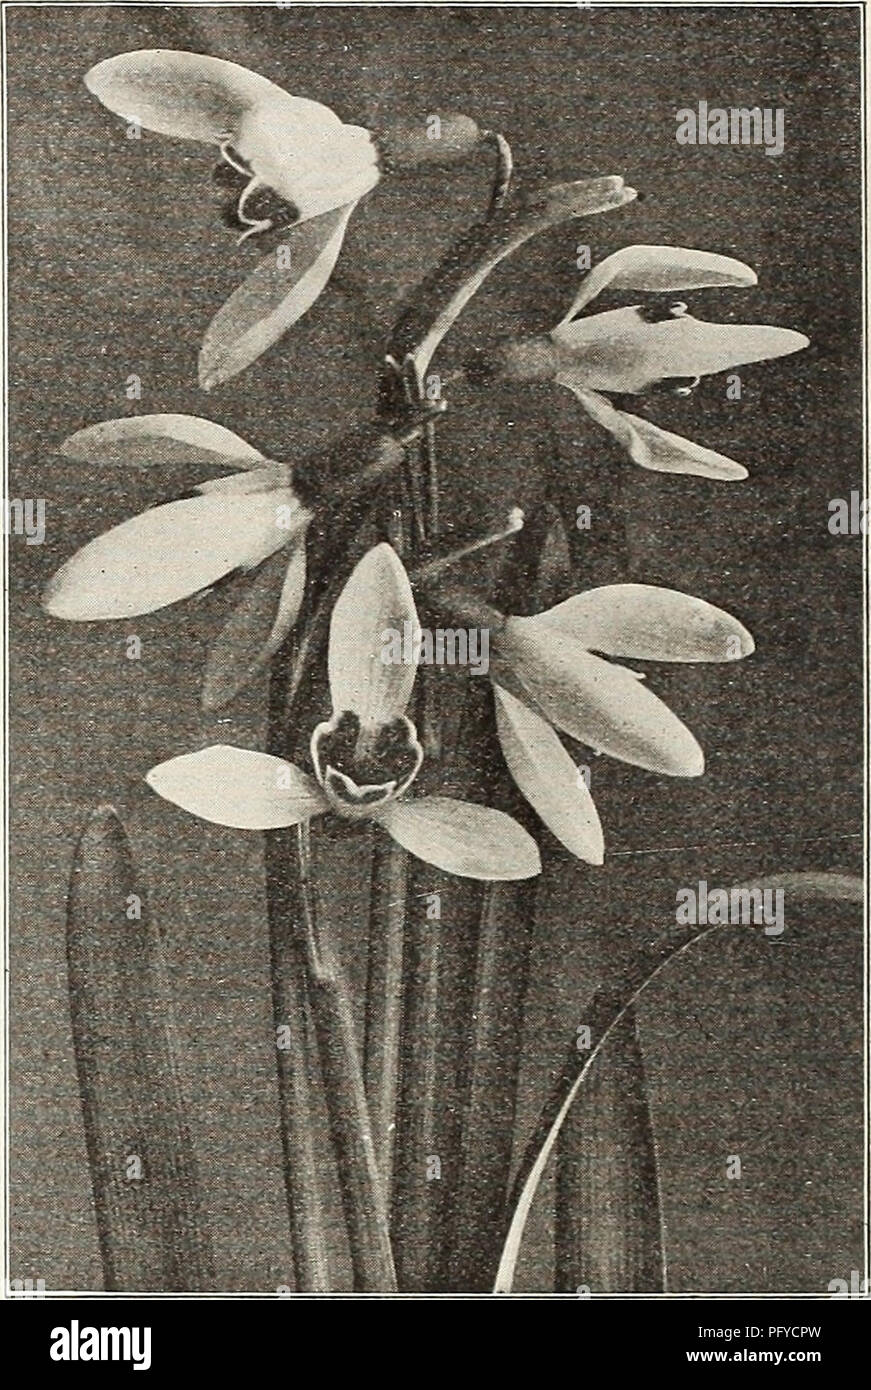 . Currie's bulbs and plants : autumn 1916. Flowers Seeds Catalogs; Bulbs (Plants) Seeds Catalogs; Nurseries (Horticulture) Catalogs; Plants, Ornamental Catalogs. SNOWDROPS. OXALIS. A very pretty and very desirable bulbous plant for pot culture and well adapted for hanging baskets. The graceful flowers are abundantly produced, although the bulbs are quite small. These should be planted not singly, but a number in each pot. Each Doz. 100 Bermuda Buttercup—Bright yellow $ .03 $ .25 $1.50 Bowii—Deep rose 03 .25 1.50 Cernua Plena—Double yellow .03 .30 2.00 Hirta Rosea—Pink 02 JO 1.25 Multiflora Alb Stock Photo